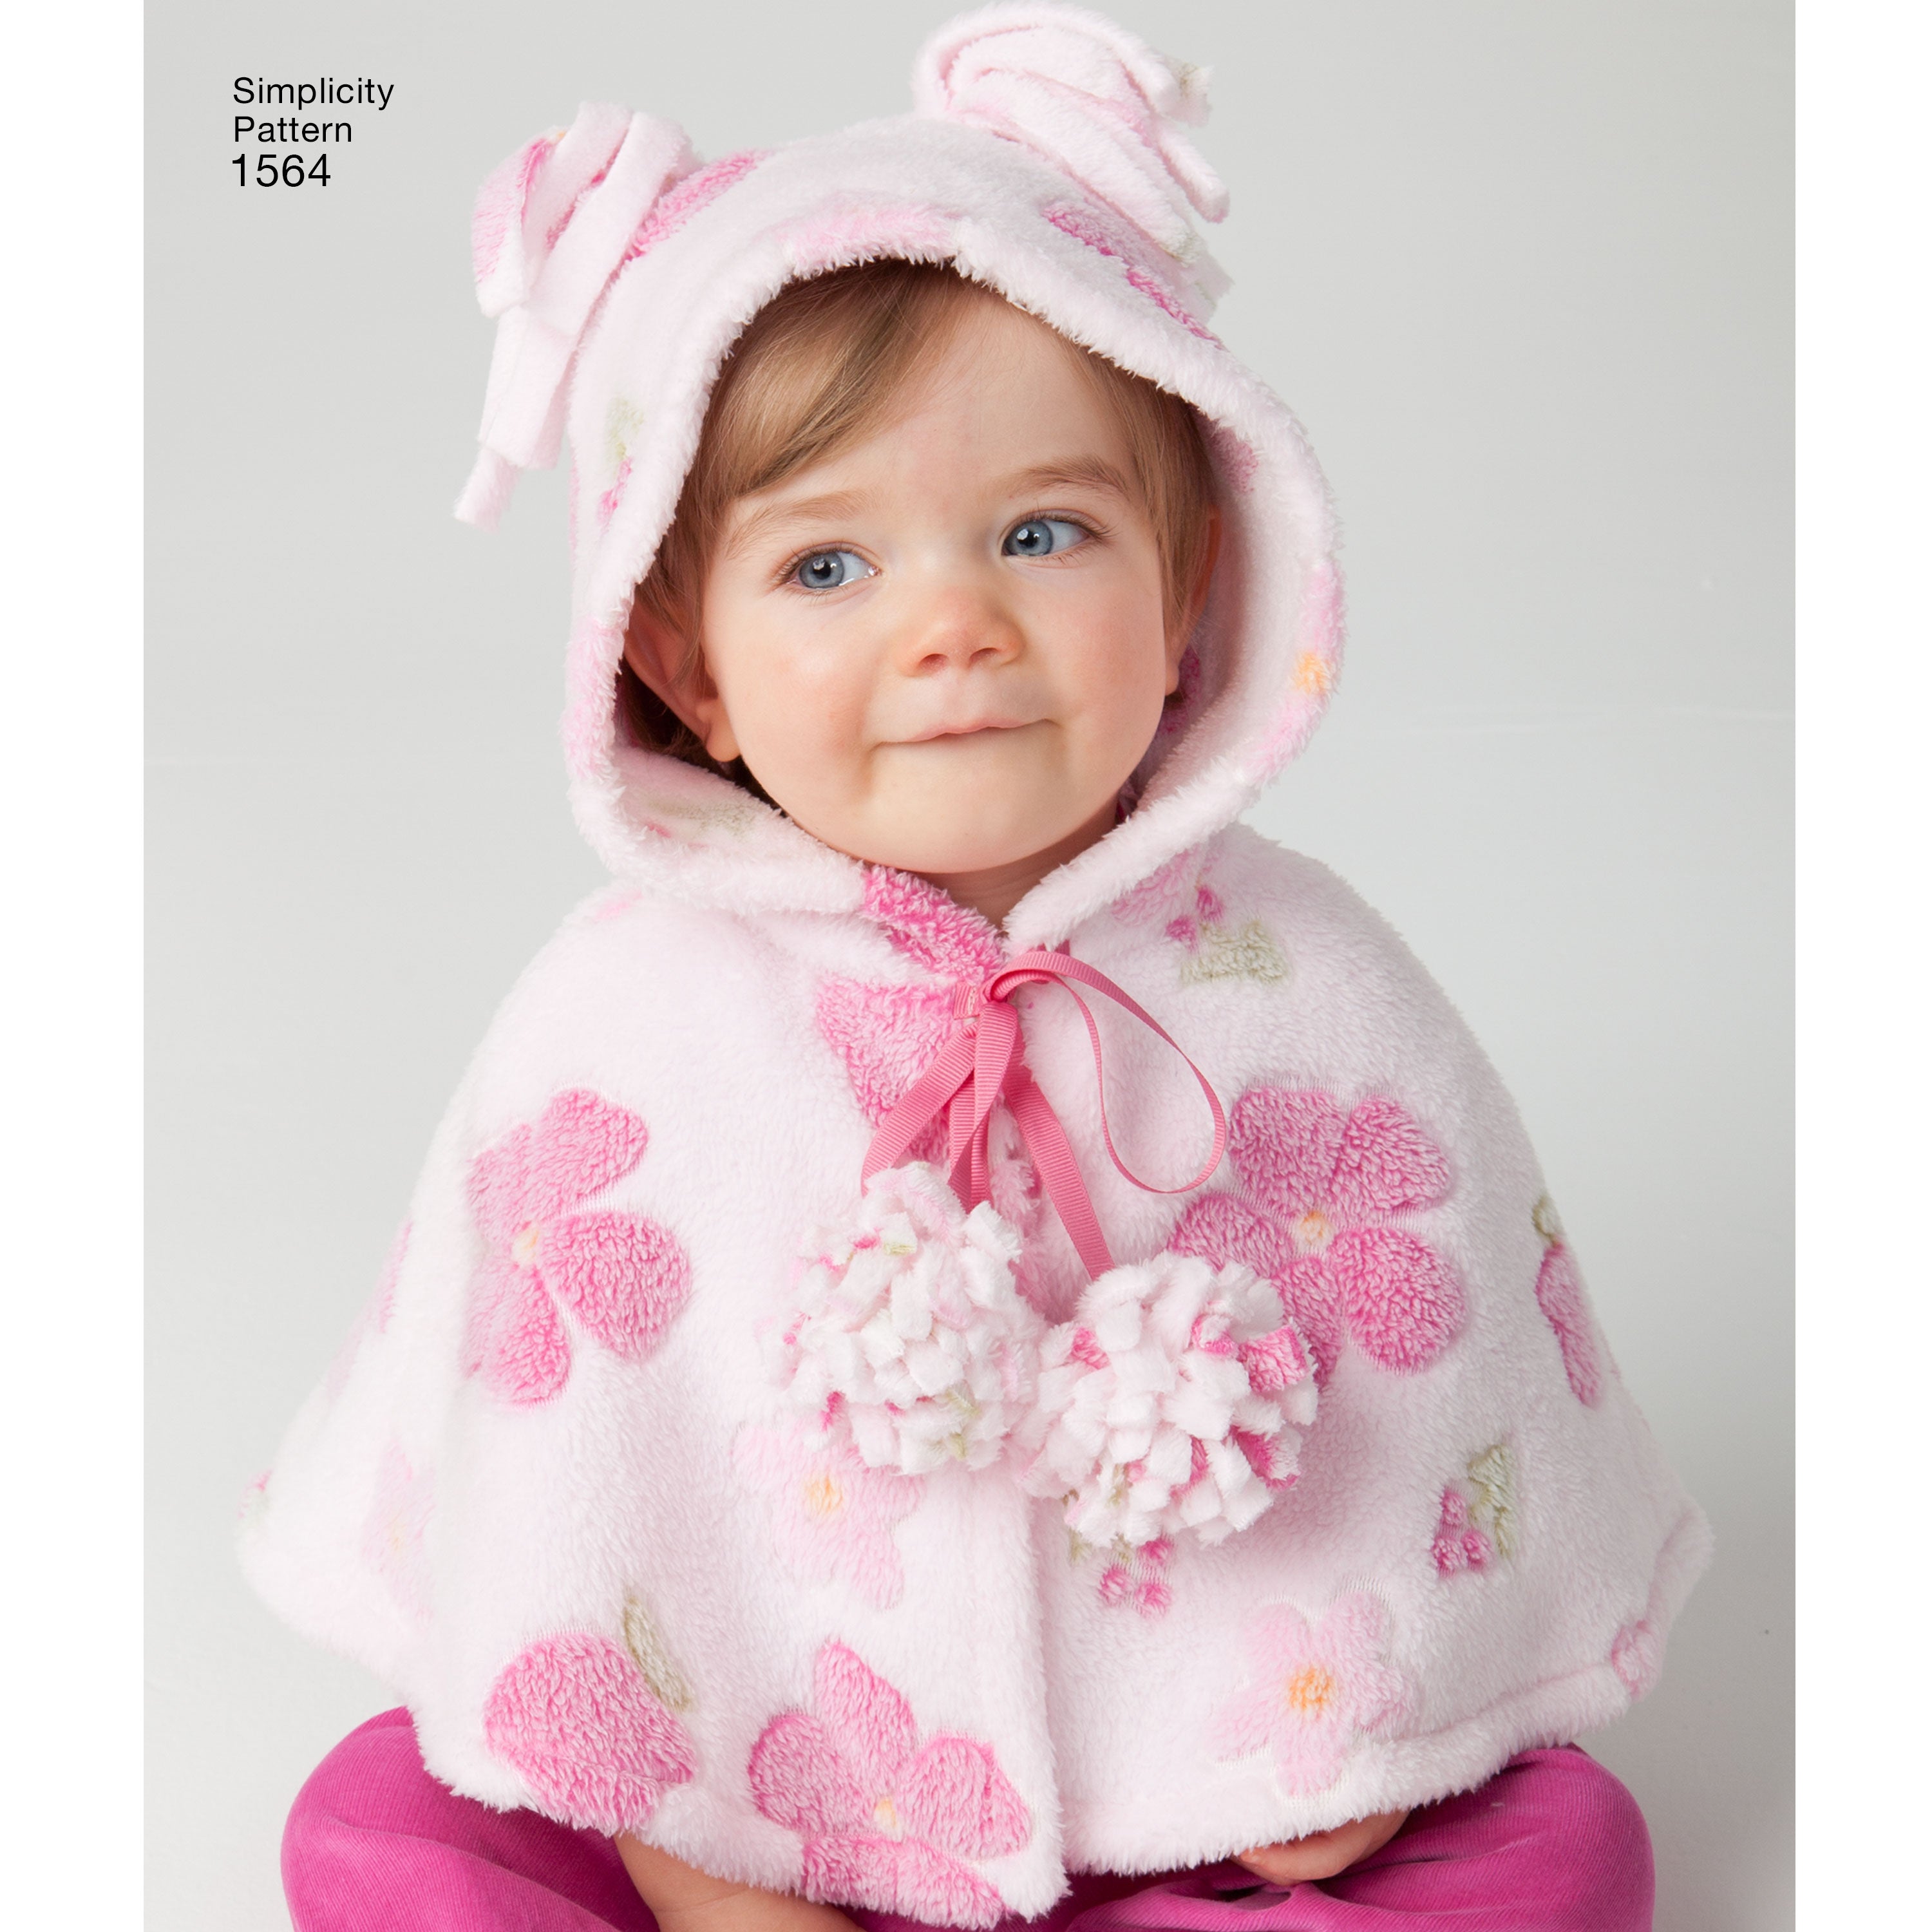 Simplicity Pattern 1564 Top, Pants, Bib, and Blanket Wrap from Jaycotts Sewing Supplies